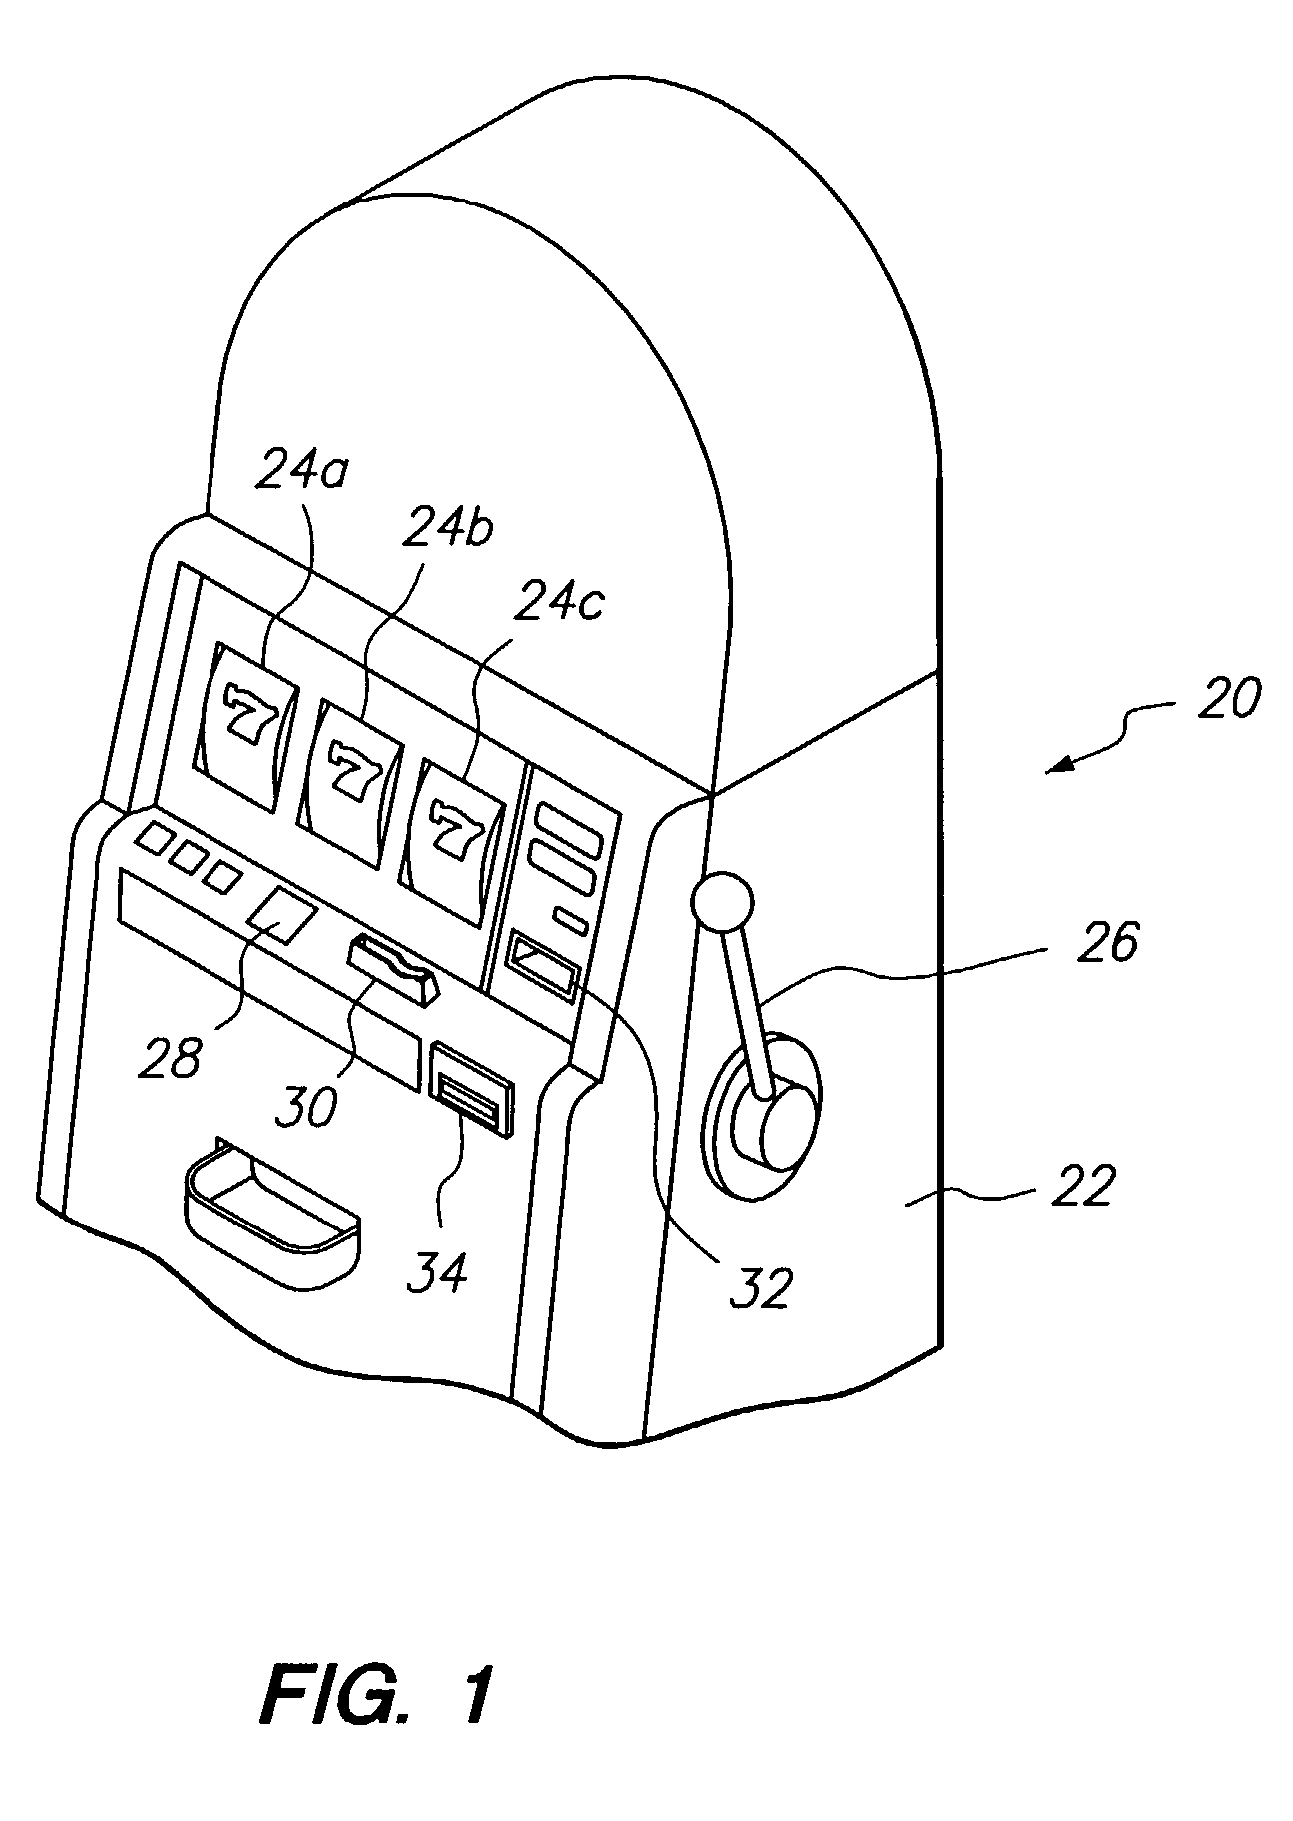 Method and apparatus for tracking game play